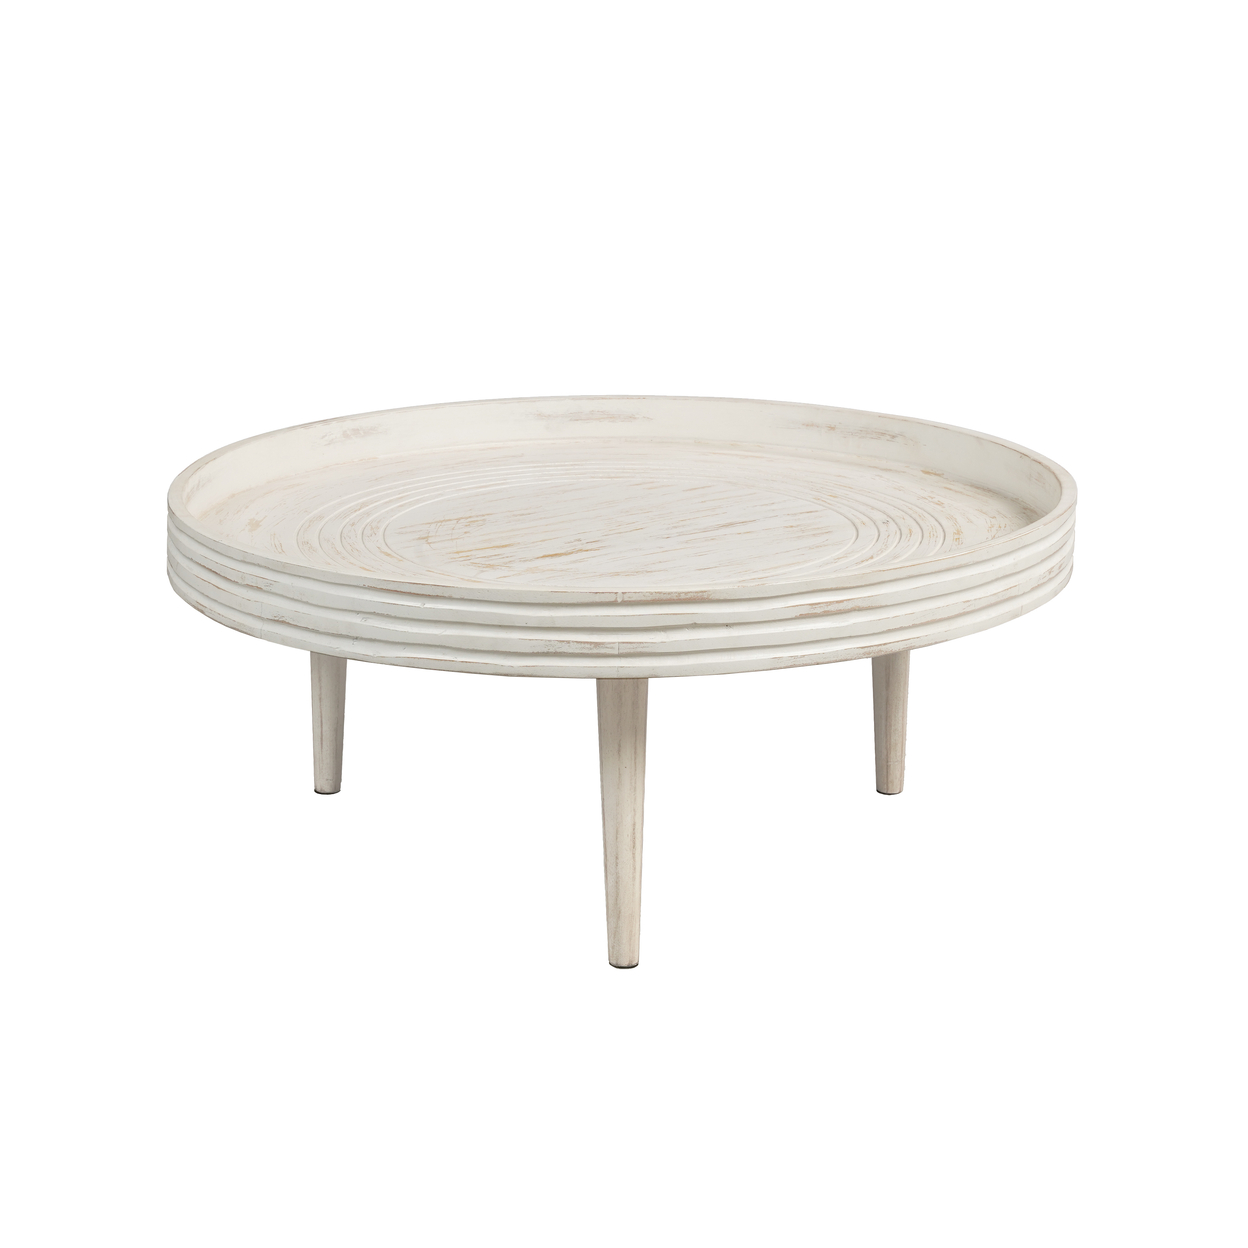 33 Inch Coffee Table, Solid Mango Wood, Handcrafted Round Grooved Raised Edge, Distressed White - Saltoro Sherpi